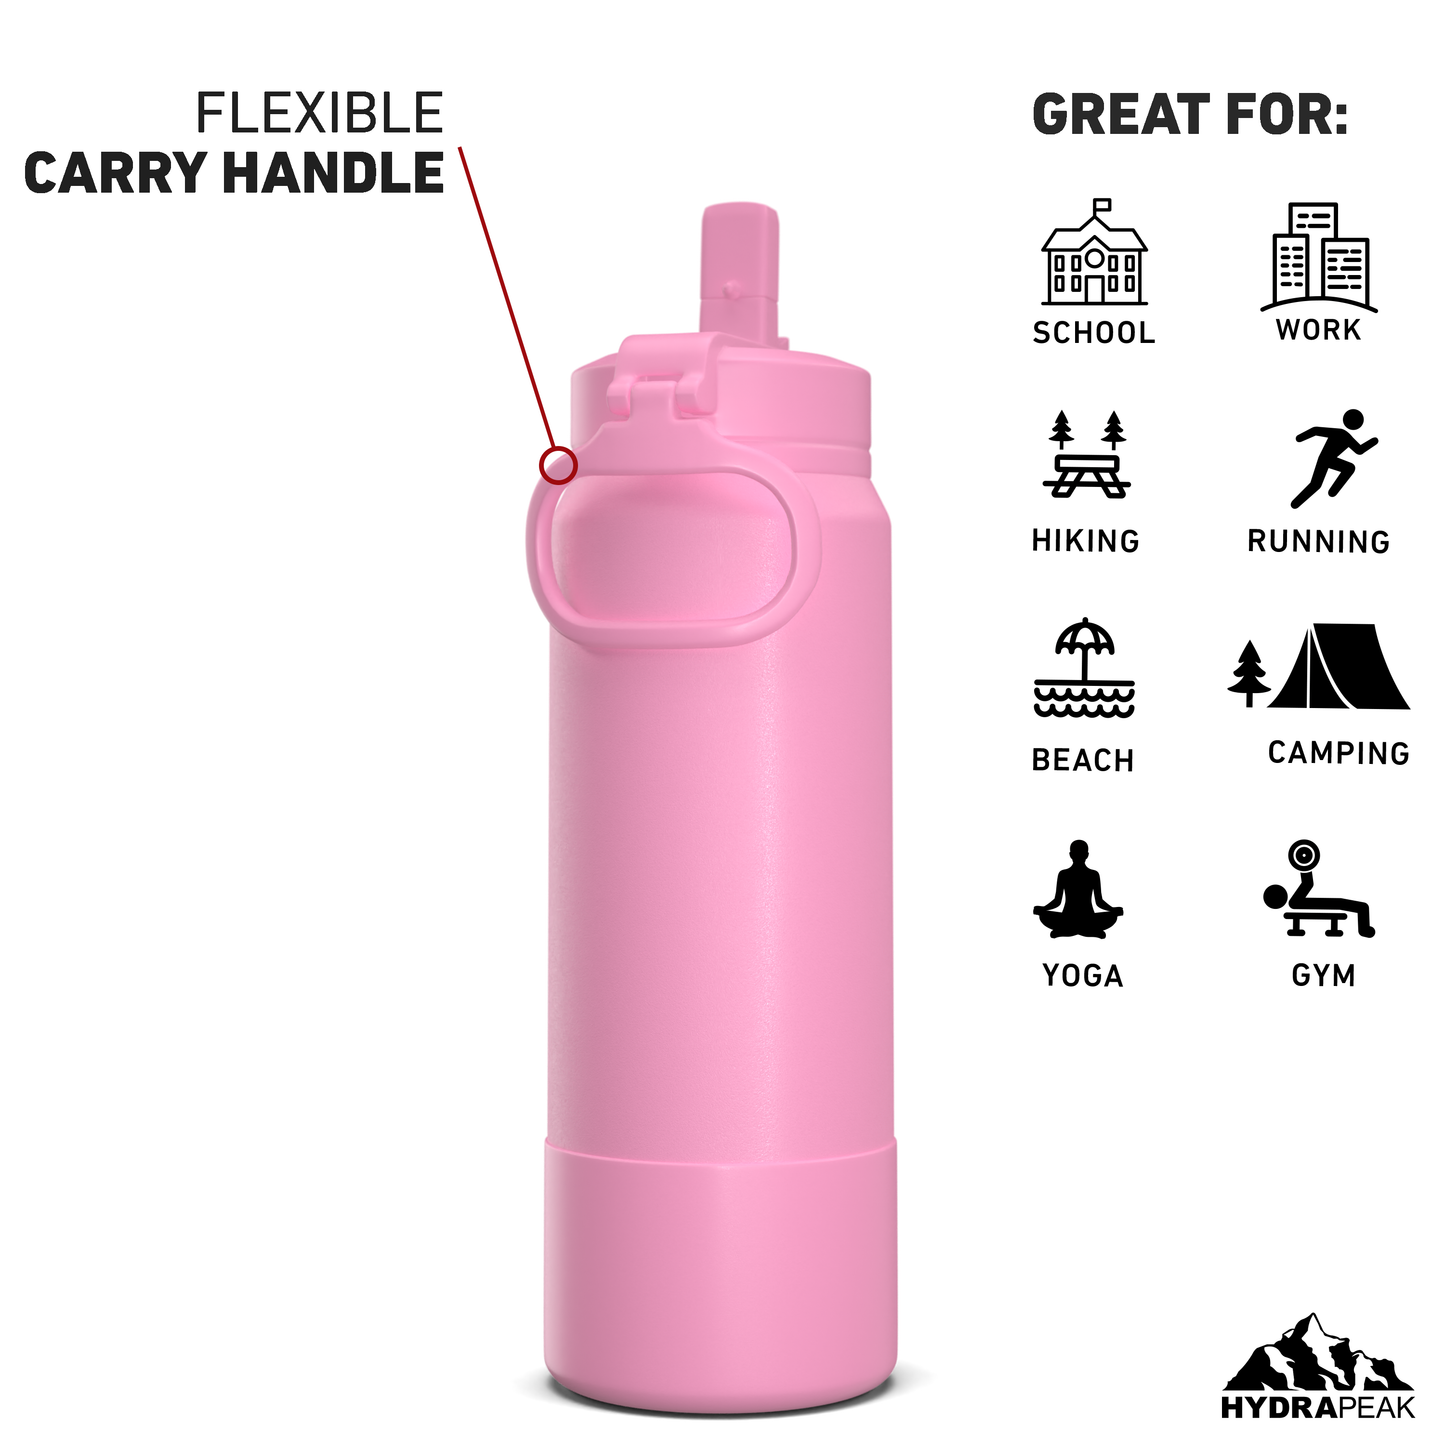 26oz Insulated Water Bottles with Matching Straw Lid and Rubber Boot - Bubblegum